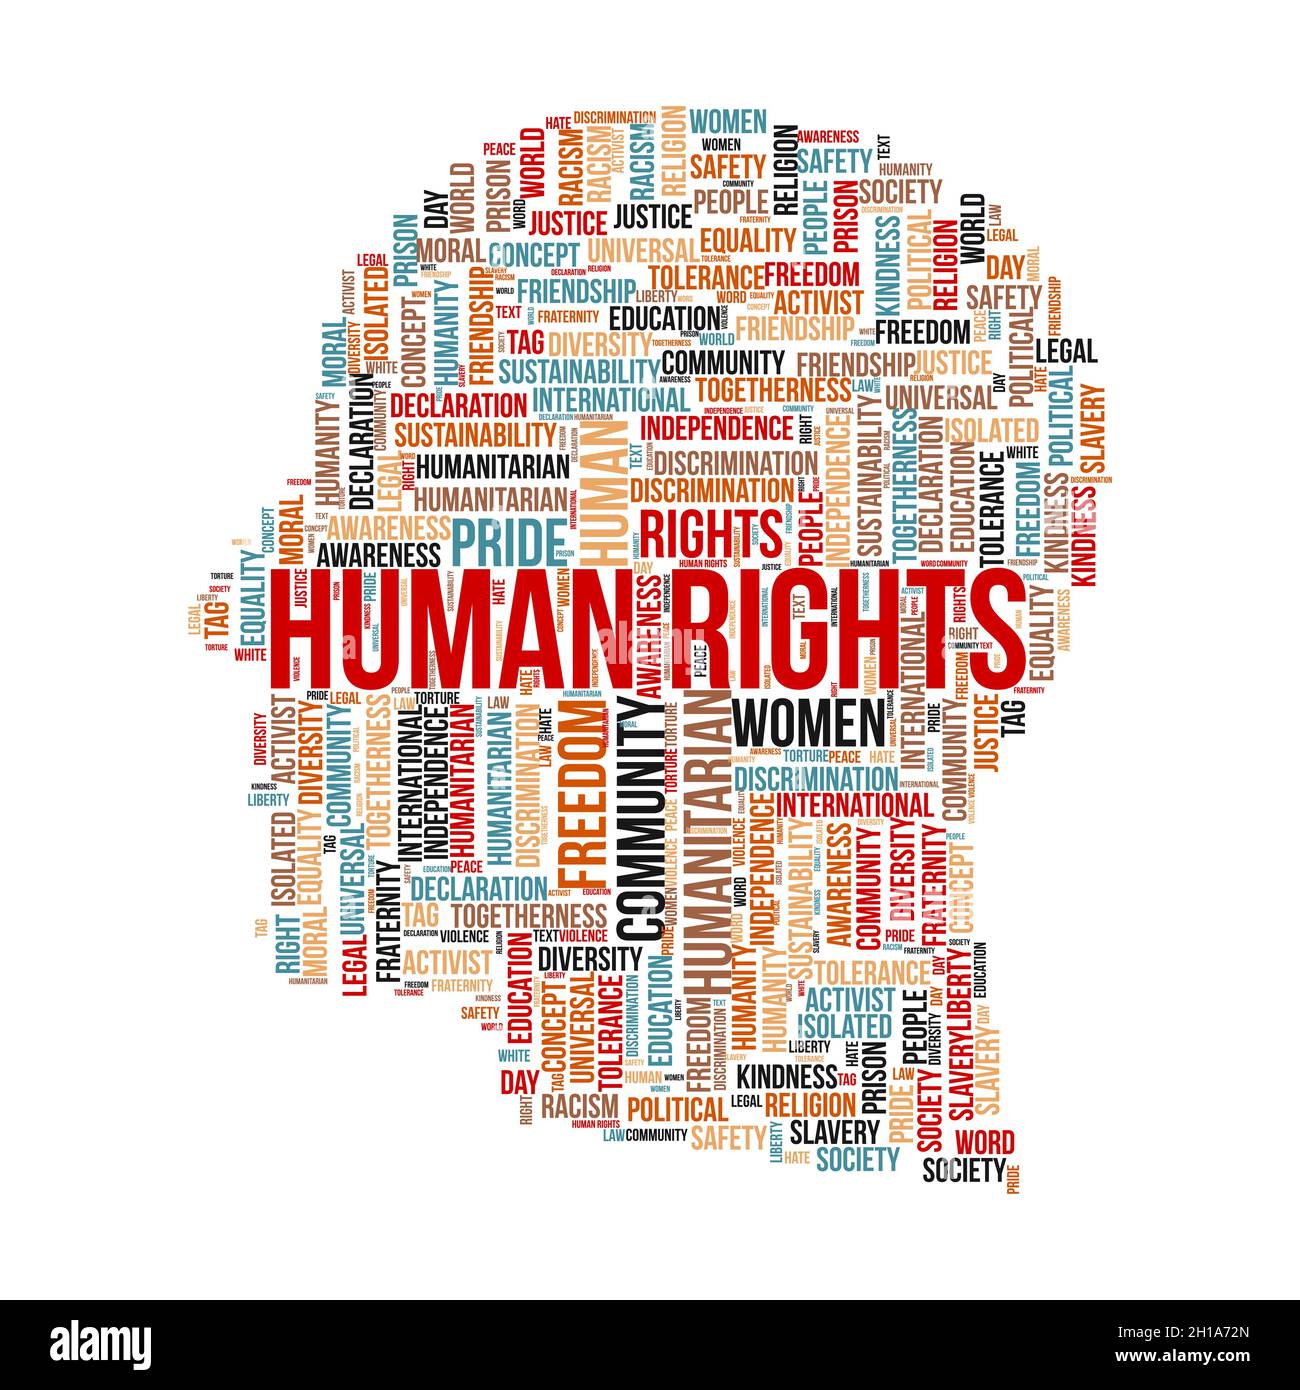 Human rights word cloud concept with human head symbol. Stock Vector